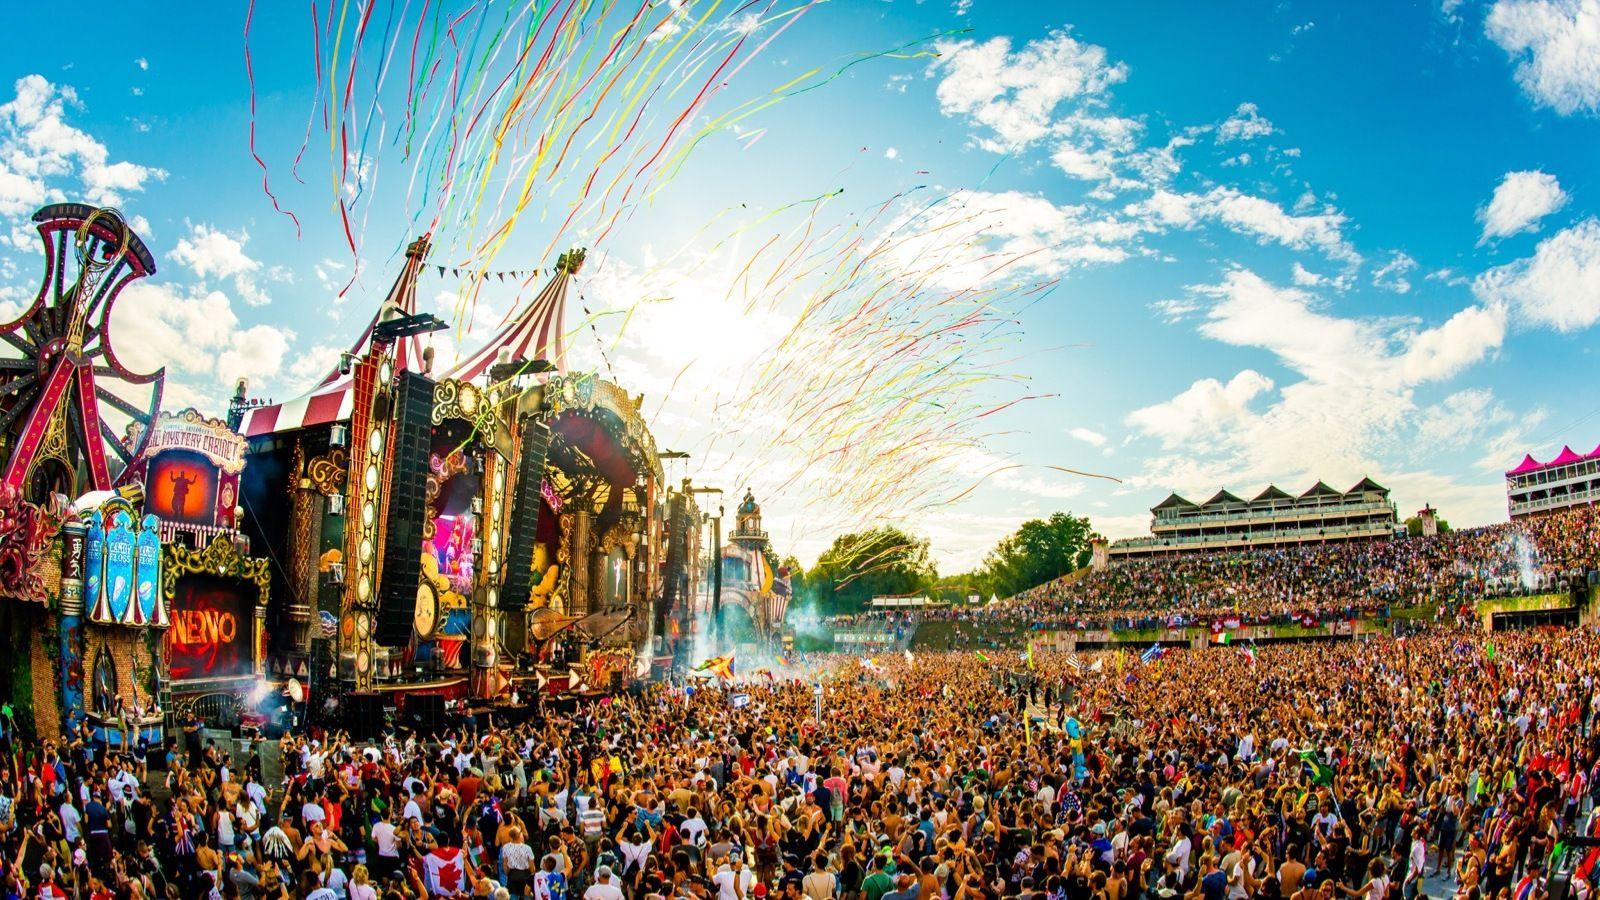 Tomorrowland unveil full artists list for 2018 edition